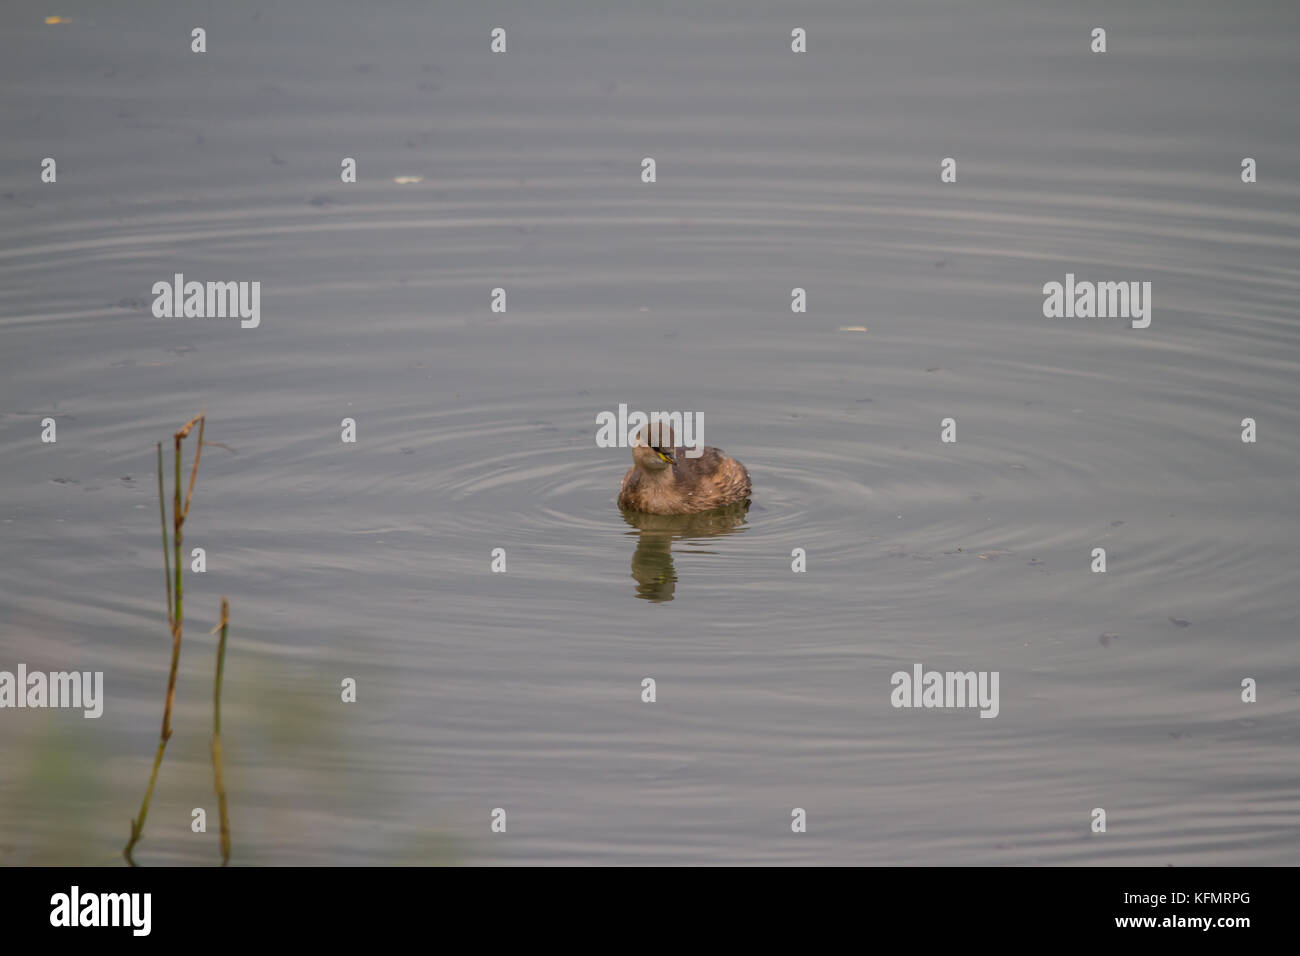 A Little Grebe (Tachybaptus ruficollis), also known as a Dabchick preparing to dive for food. Stock Photo